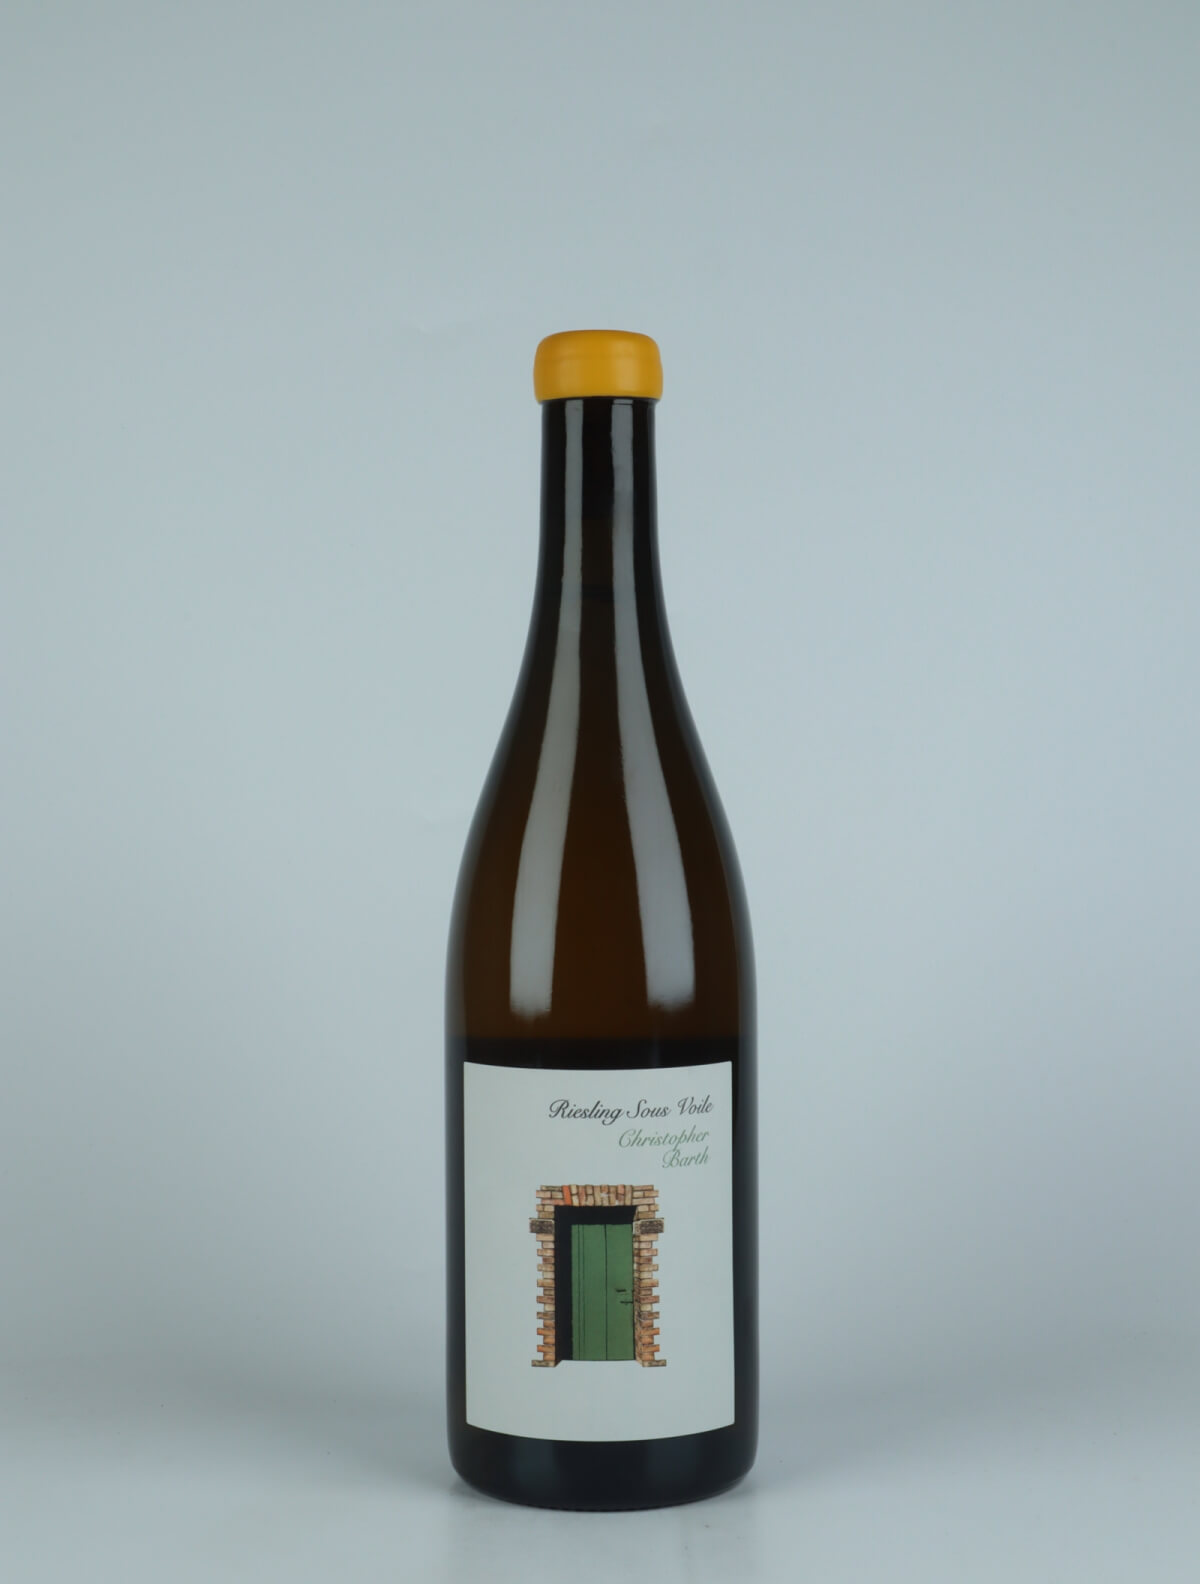 A bottle 2020 Riesling Sous Voile White wine from Christopher Barth, Rheinhessen in Germany